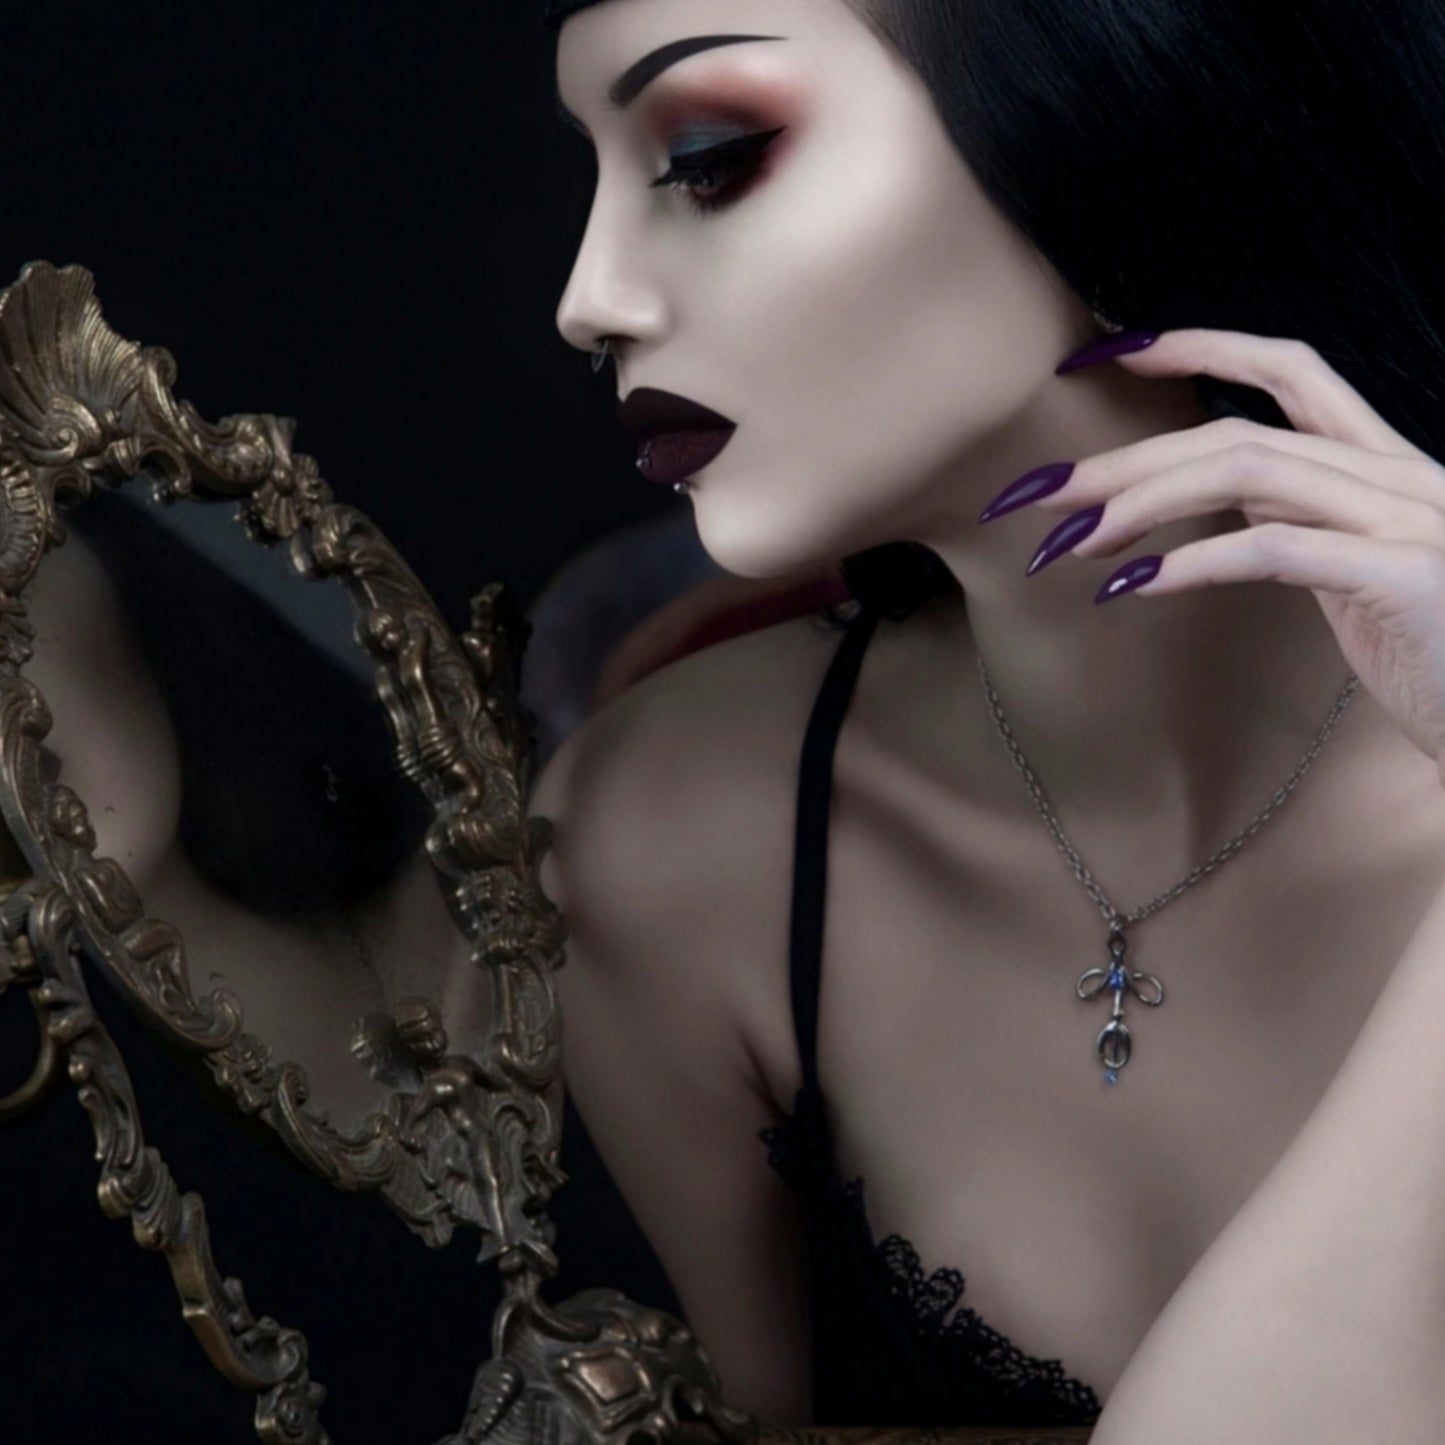 Mirror Stainless Steel Necklace | Cassiopeia Tanzanite Center Stone - Rogue + Wolf - Necklaces